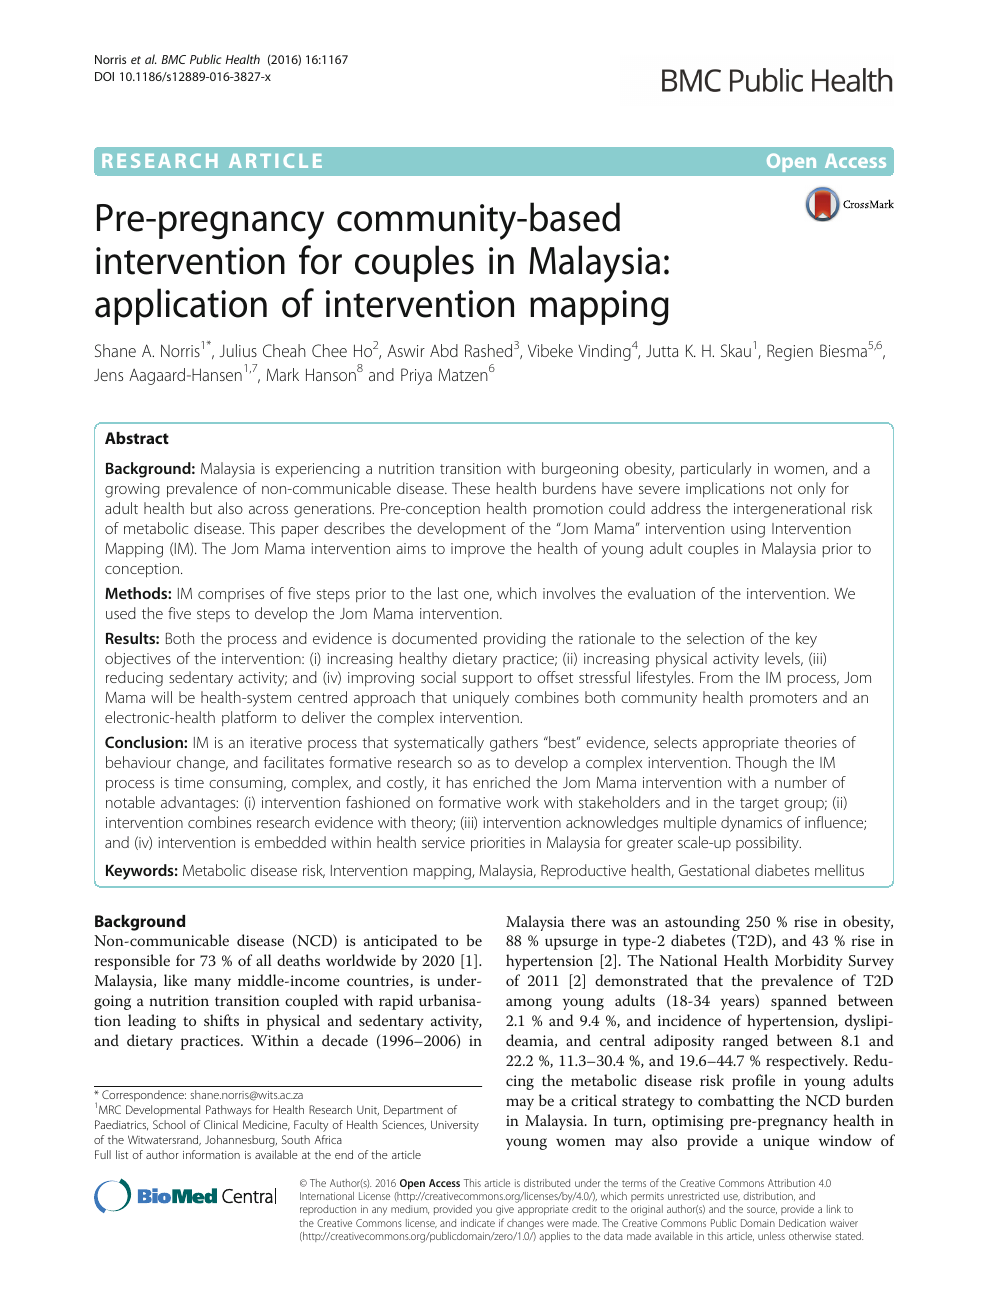 Pre Pregnancy Community Based Intervention For Couples In Malaysia Application Of Intervention Mapping Topic Of Research Paper In Economics And Business Download Scholarly Article Pdf And Read For Free On Cyberleninka Open Science